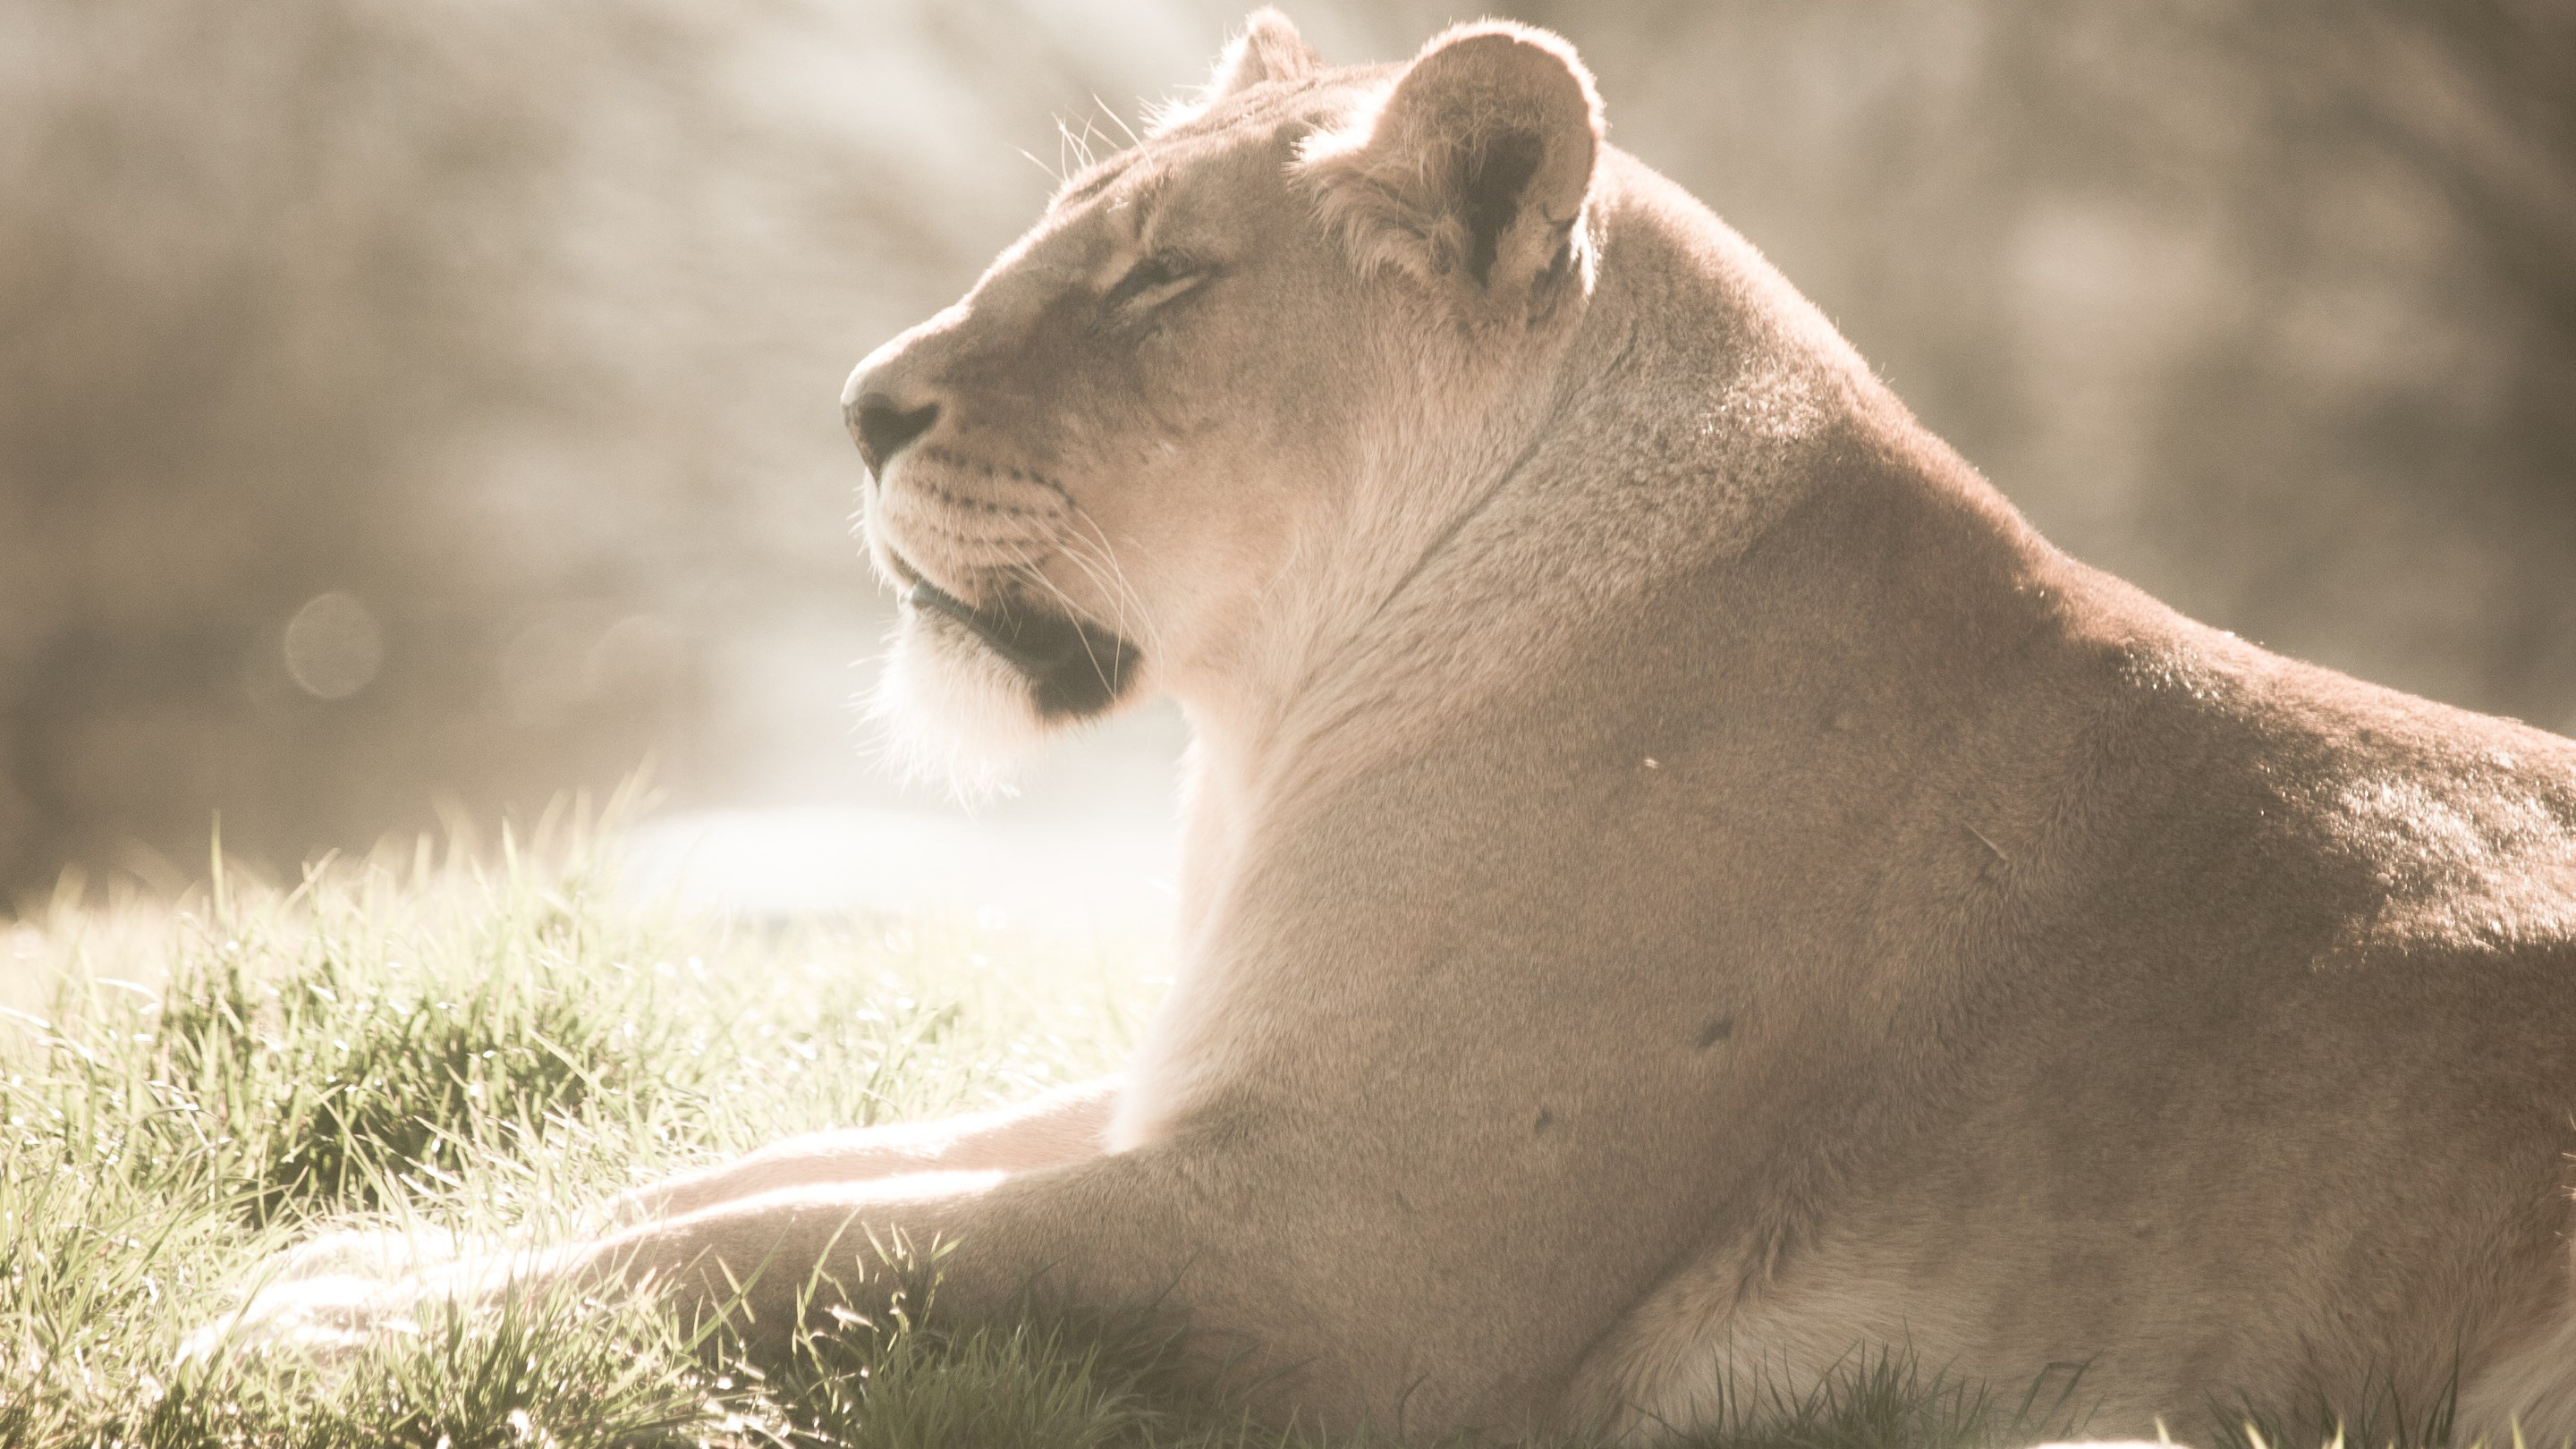 Lioness at Whipsnade Zoo wallpaper 2880x1620